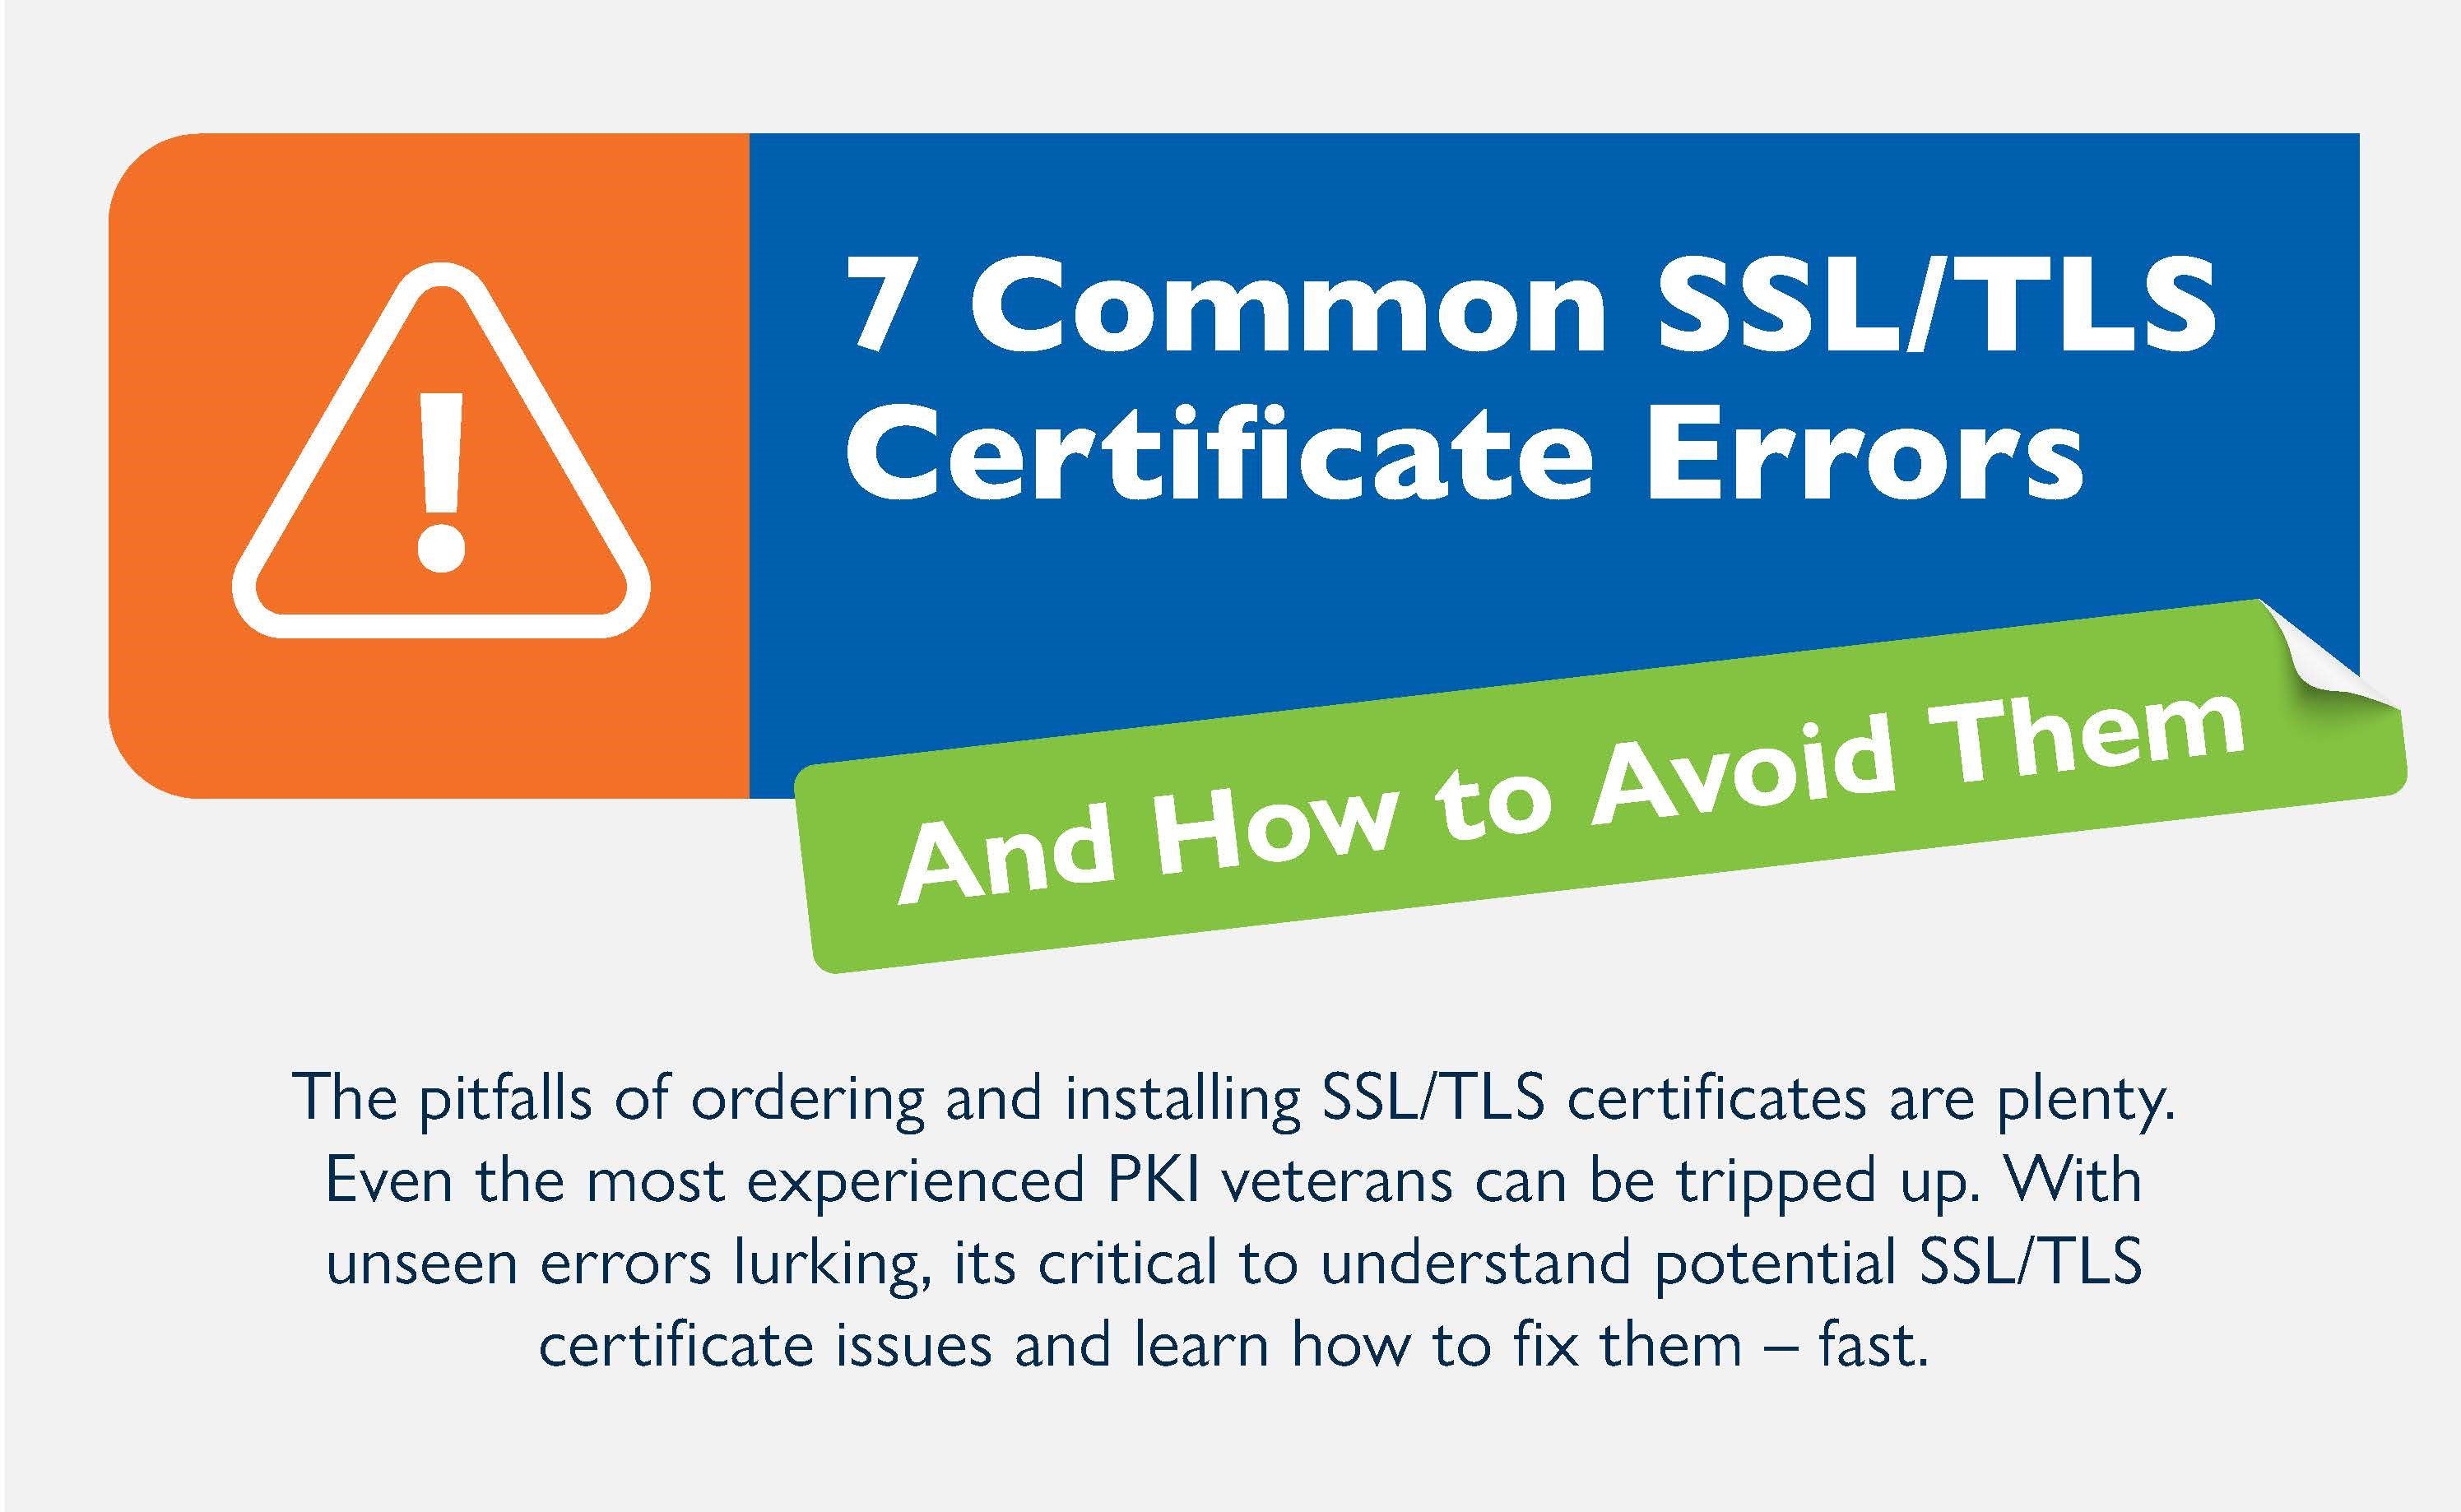 Infographic - 7 Common SSL/TLS Certificate Errors and How to Avoid Them